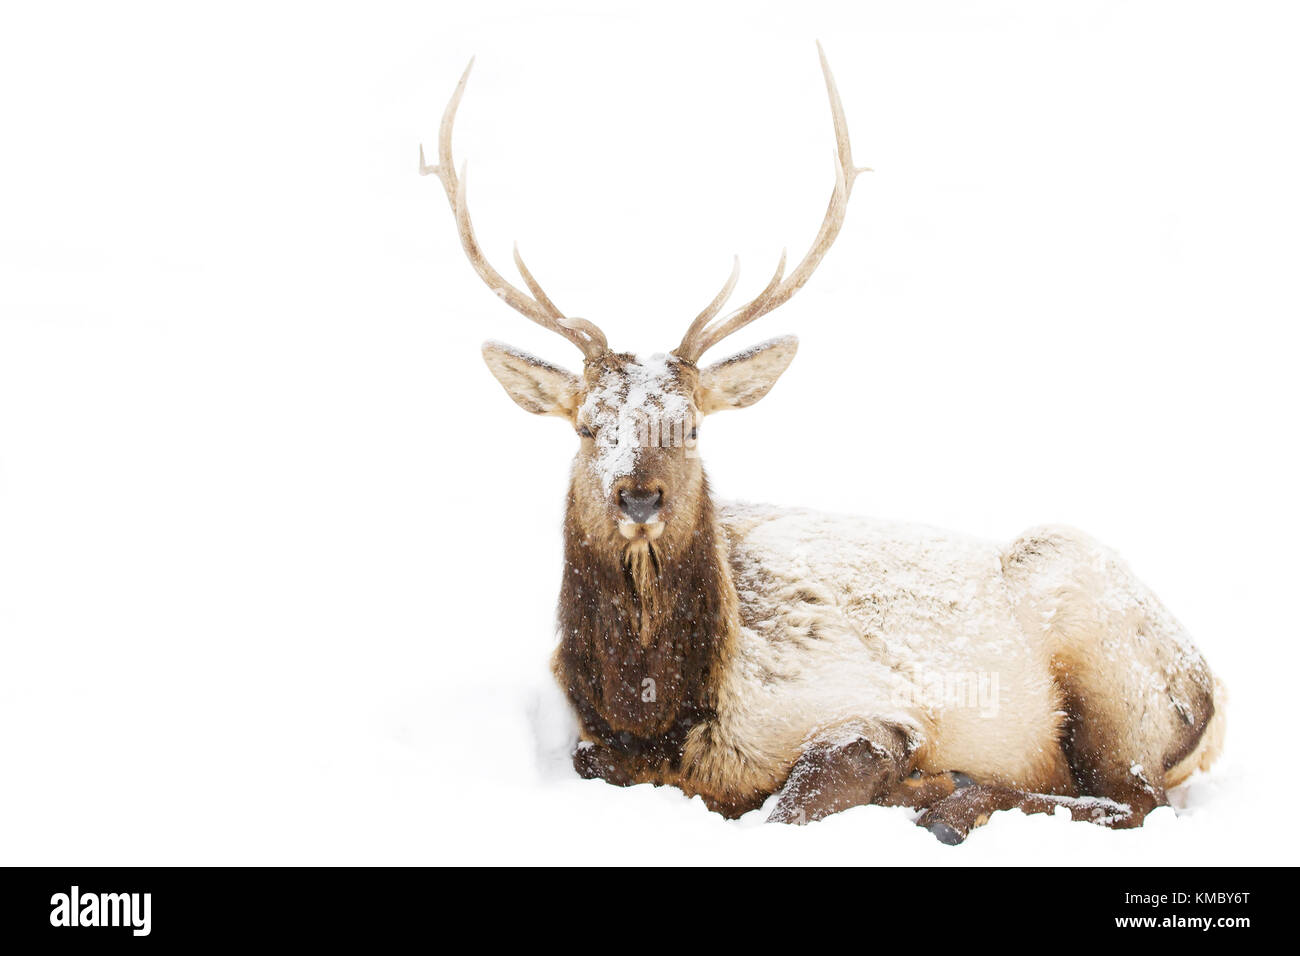 Bull Elk with large antlers sitting in the snow Stock Photo